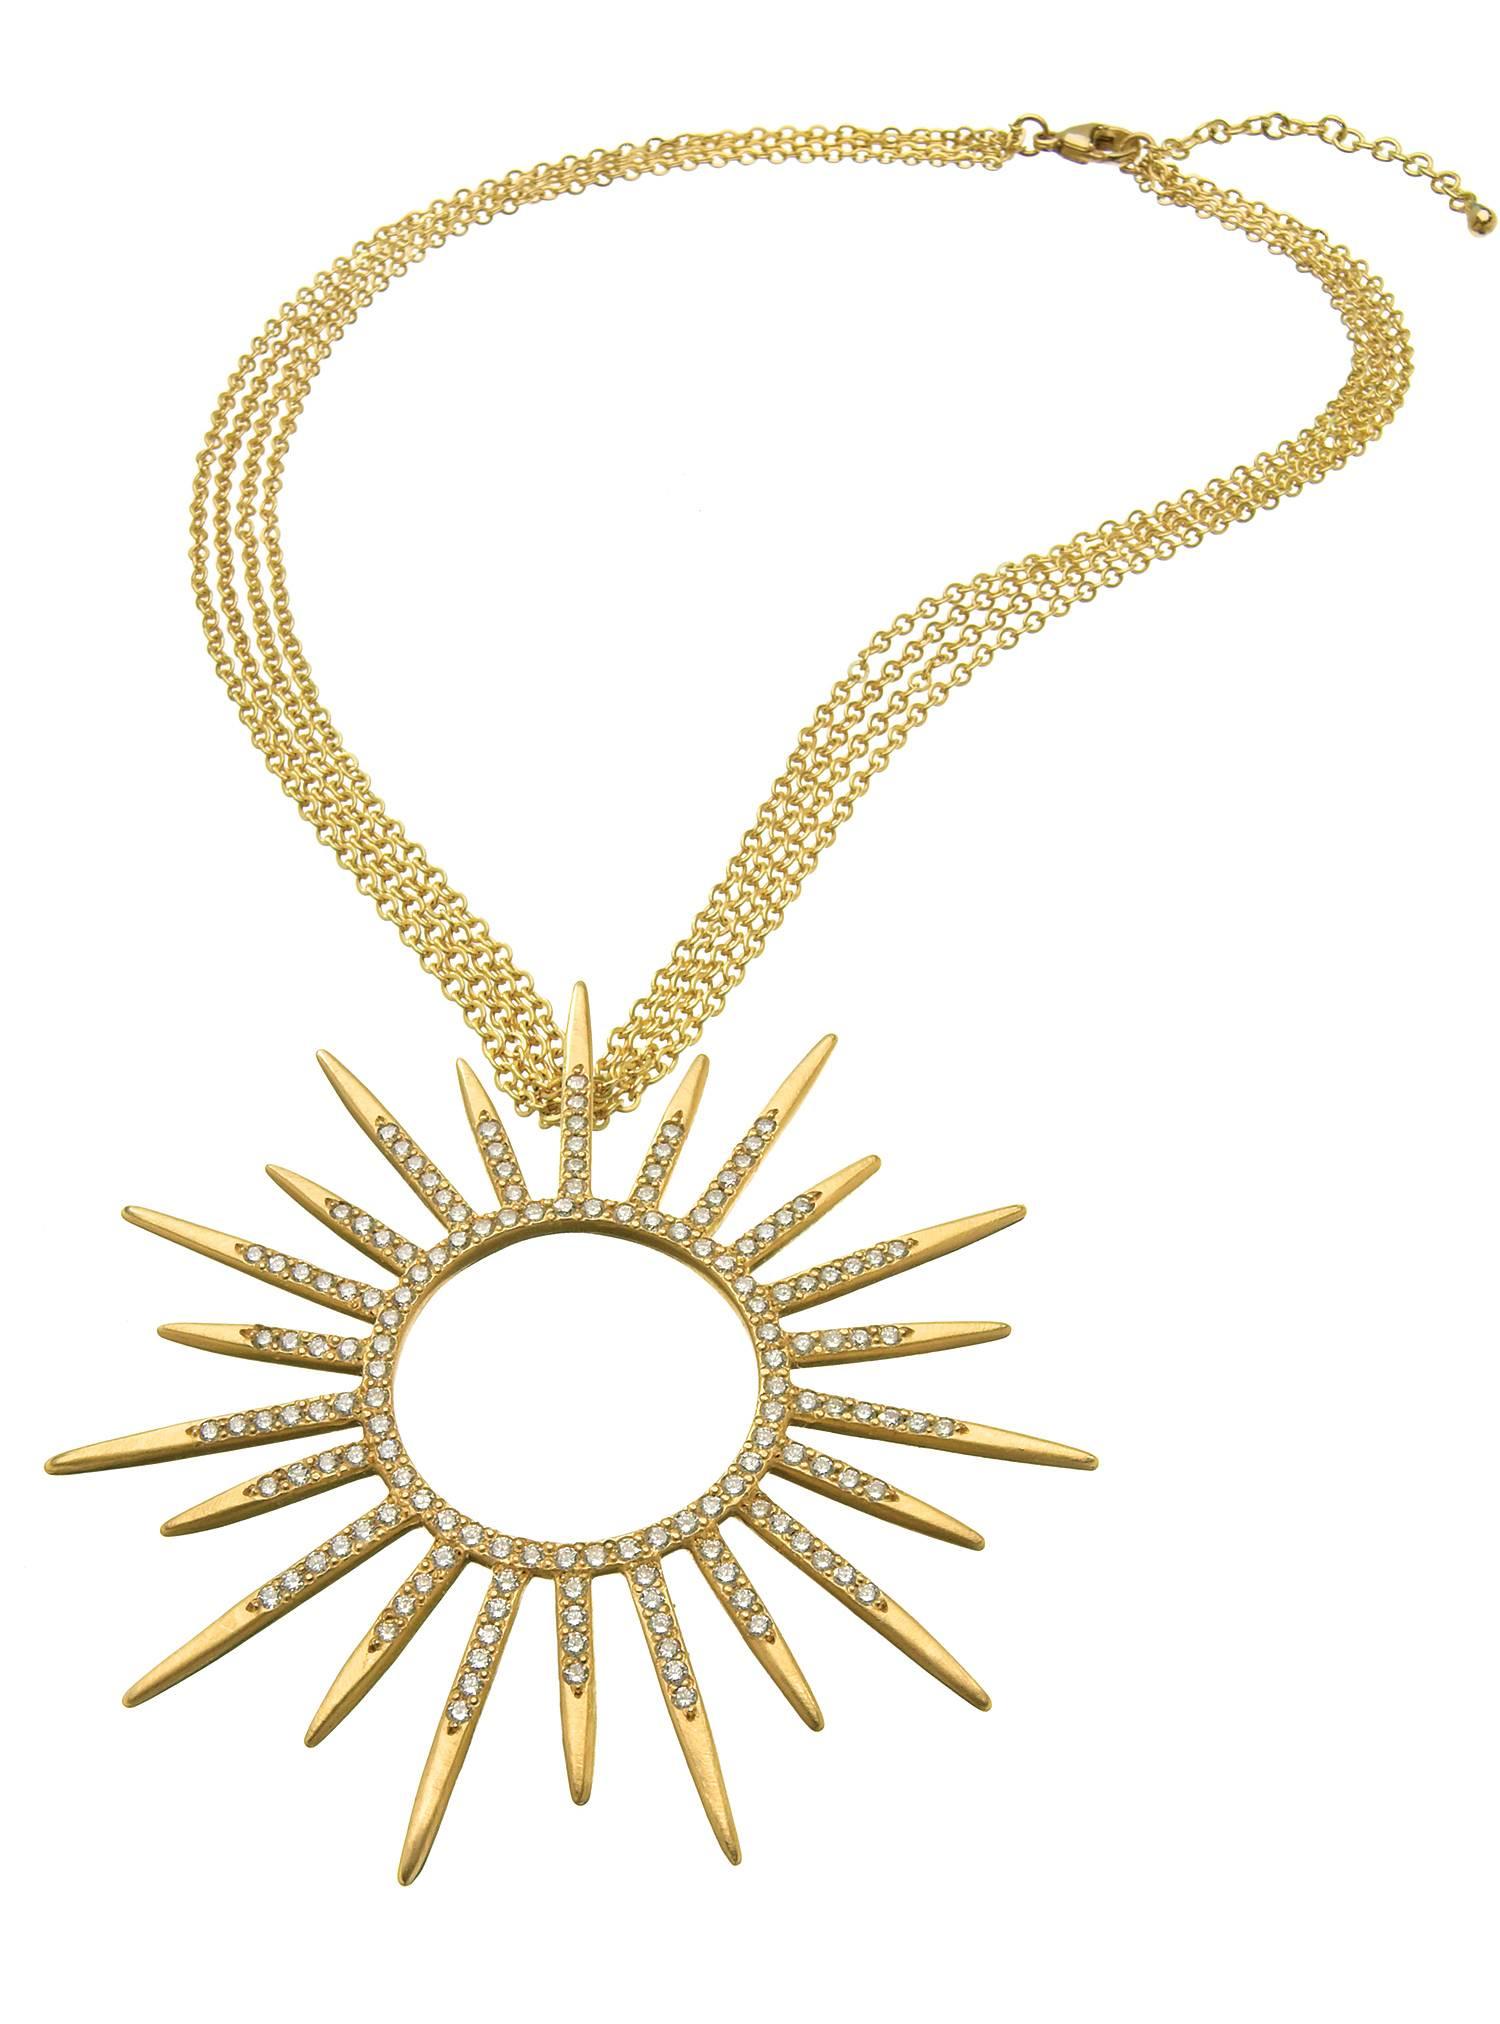 Like many of Wendy's designs, this starburst pendant was inspired by a brilliant woman -- Queen Elizabeth I. Her artisans in New York City sat with Wendy for hours discussing proportion, creating balance with a multi-strand chain, and planning where